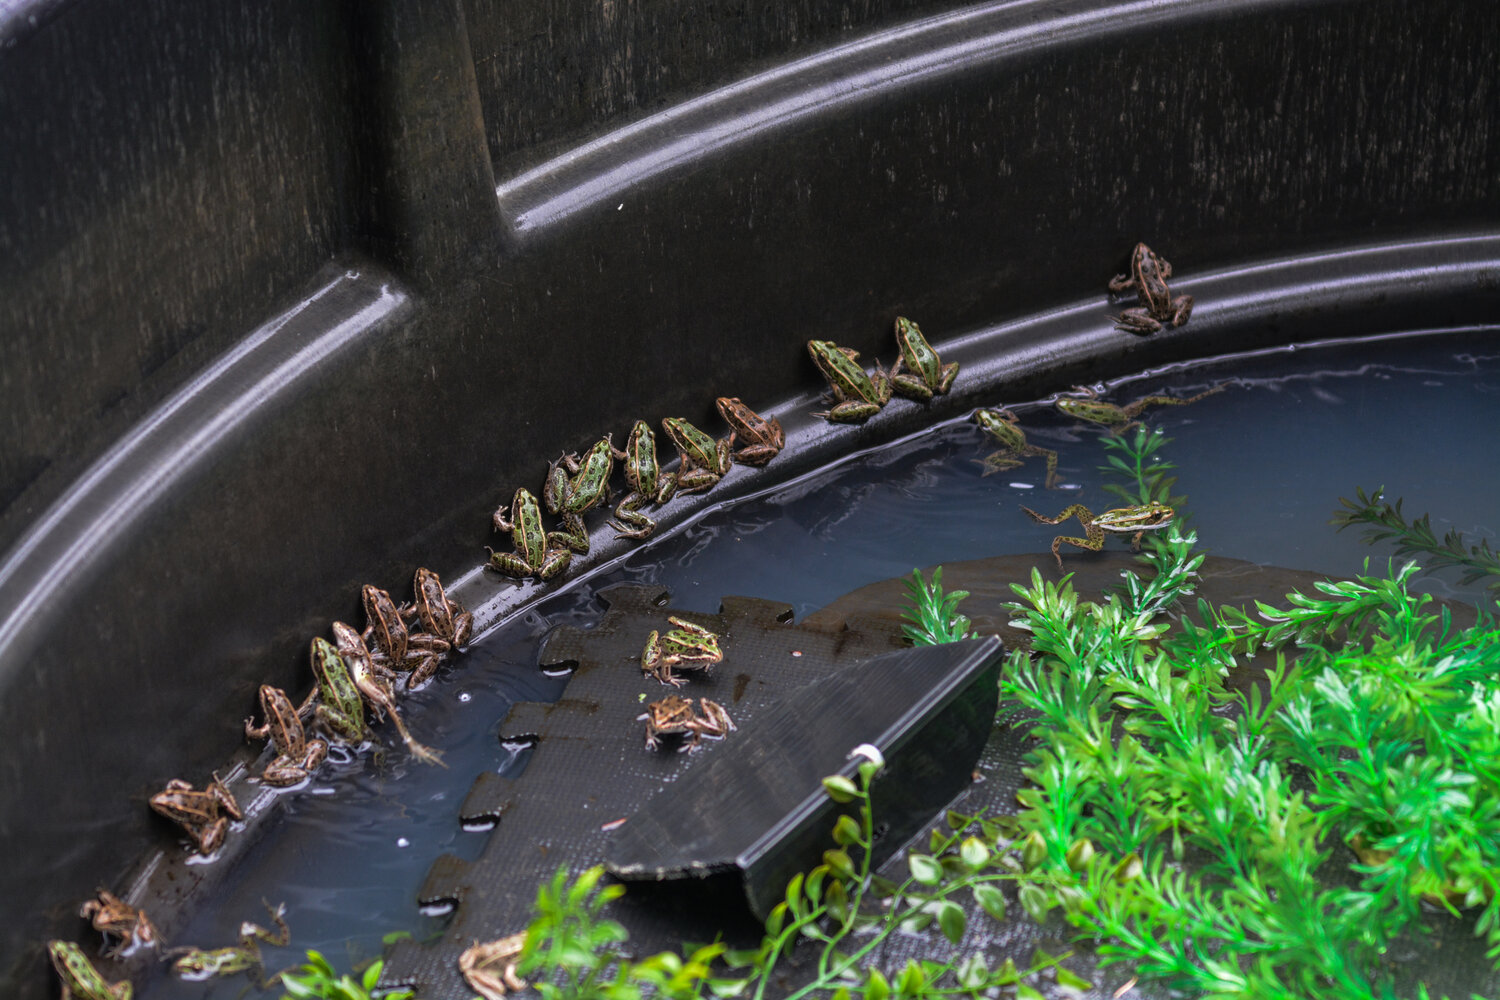 Over 20 Northern Leopard Frogs are shown in one of several controlled enviornment areas where the frogs currently reside at Northwest Trek in Eatonville on Aug. 9.